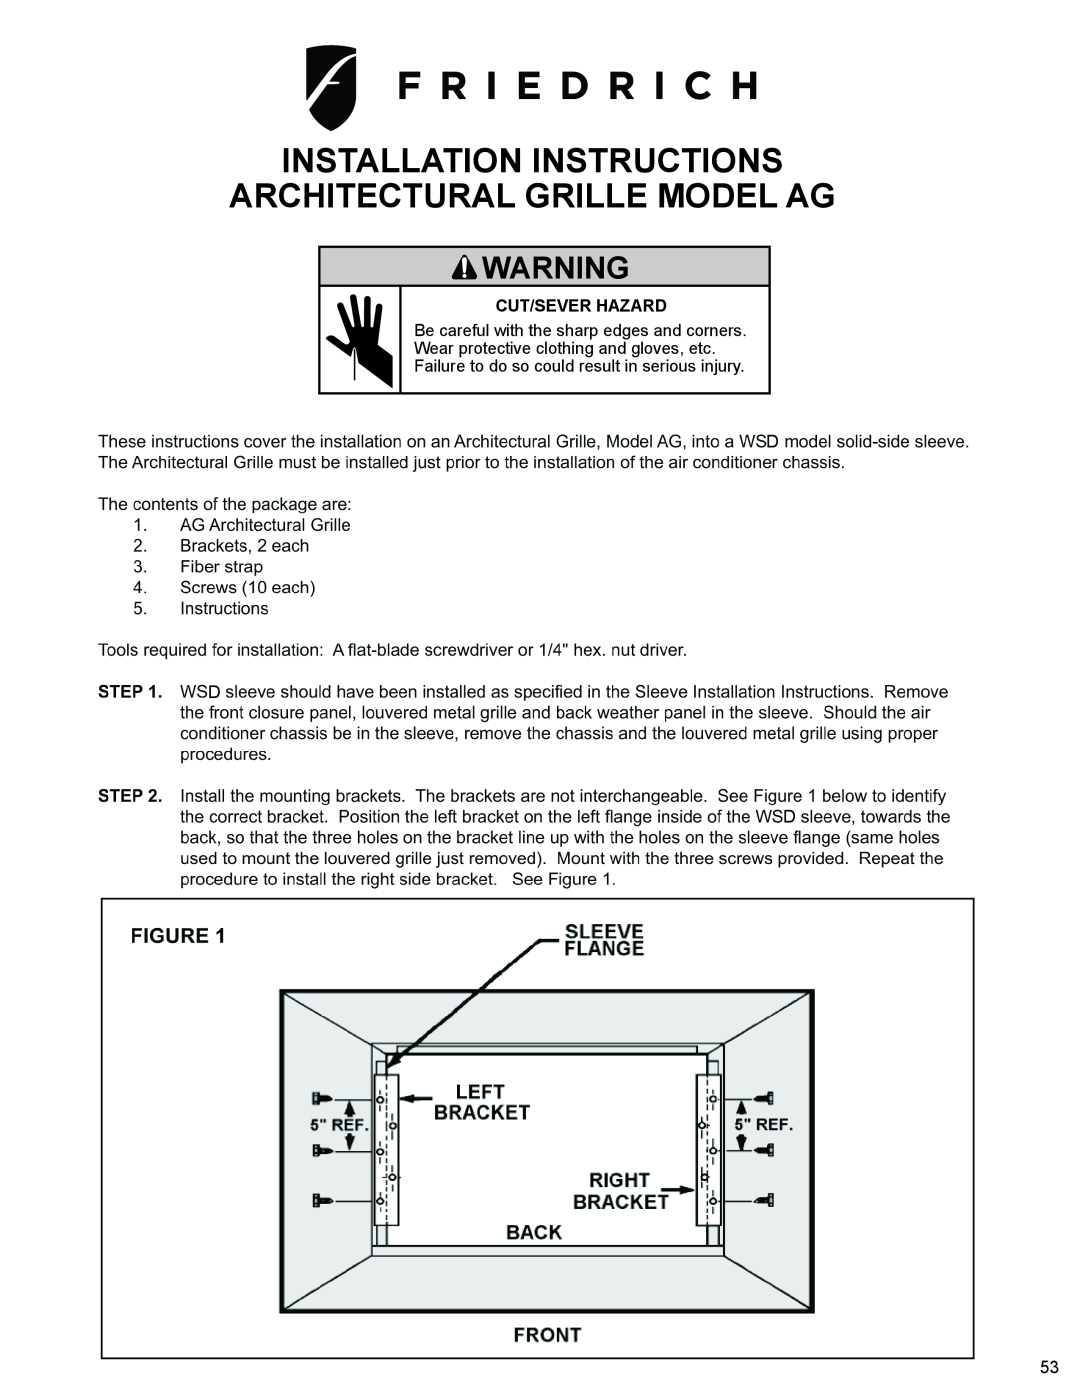 Friedrich WS10B10 service manual Architectural Grille Model Ag, Installation Instructions, Mechanicalcut/Sever Hazard 